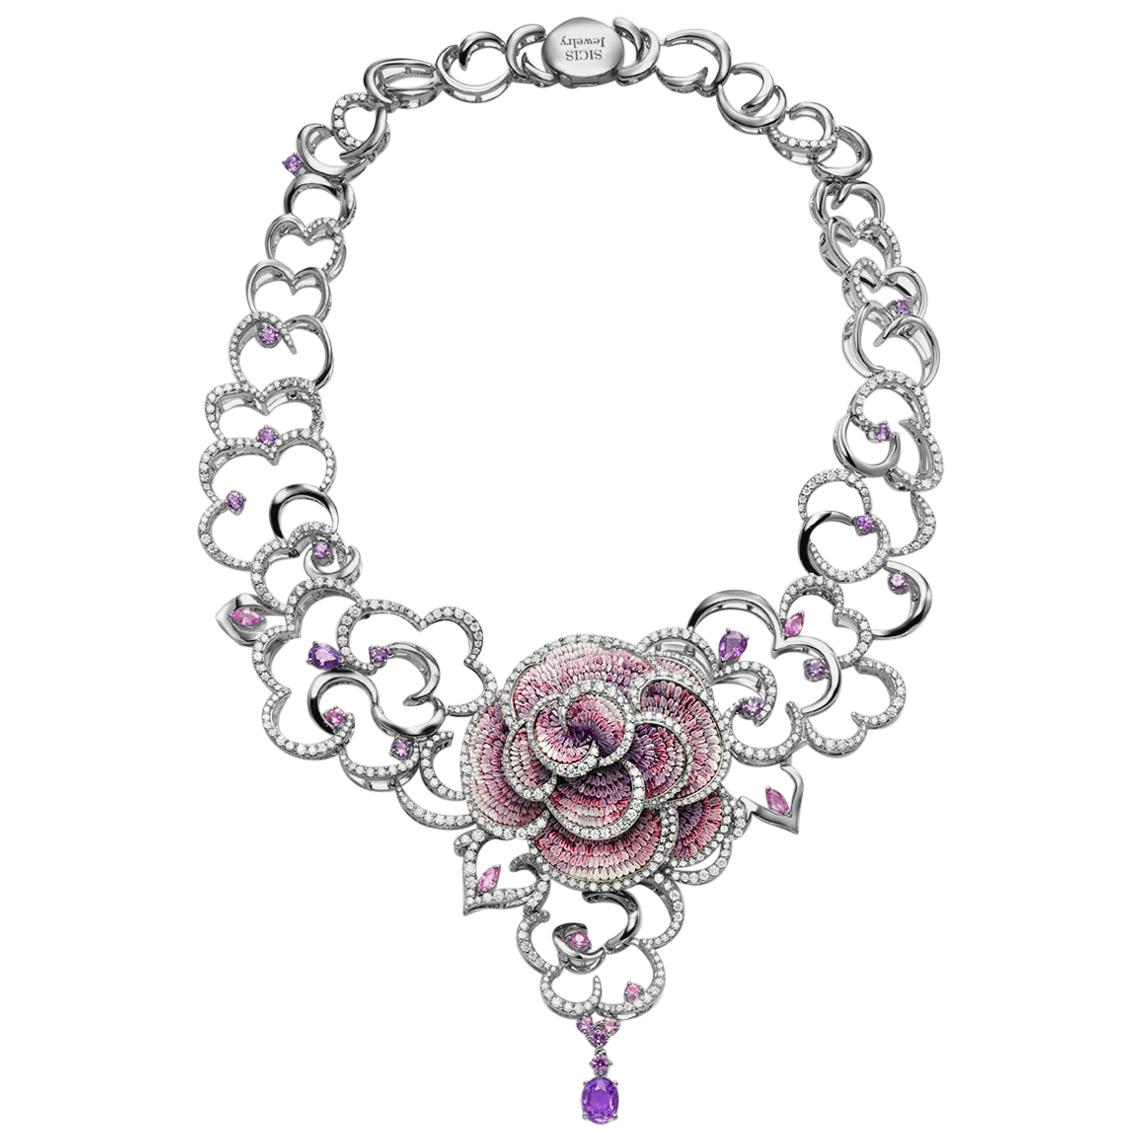 Necklace White Gold White Diamonds Sapphires Hand Decorated with Micro Mosaic